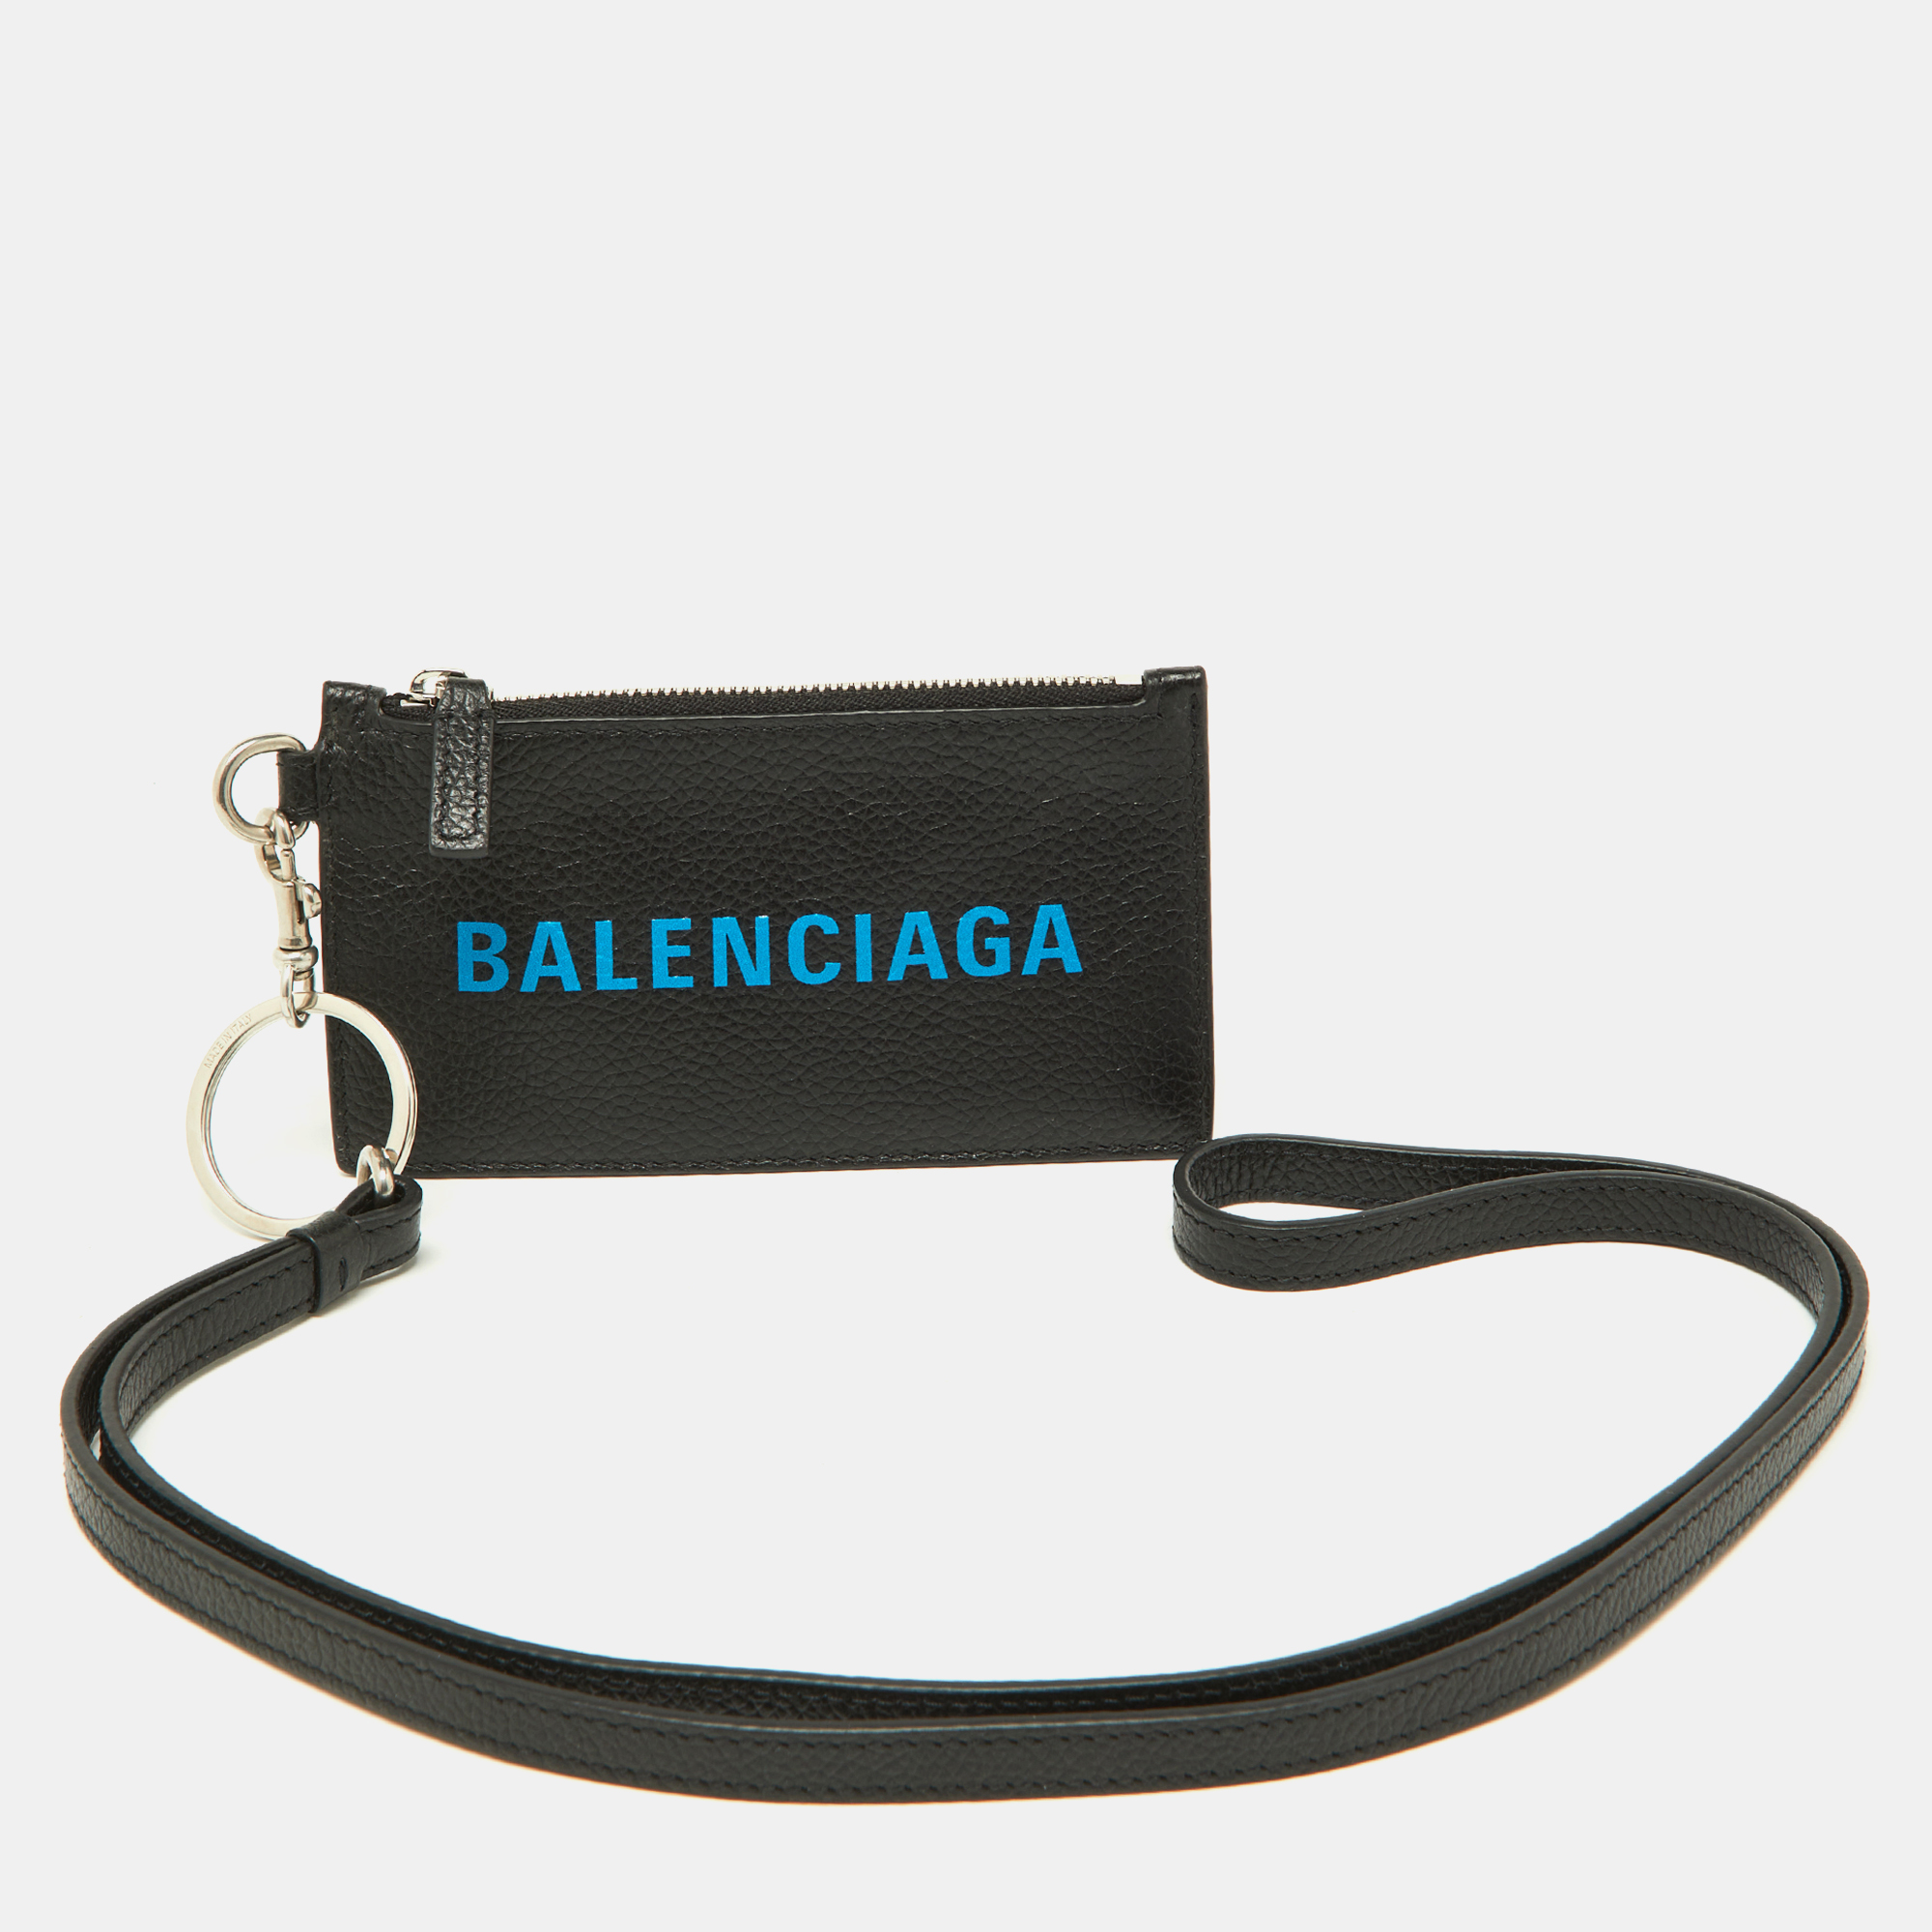 

Balenciaga Black/Blue Leather Zip Card Holder with Strap